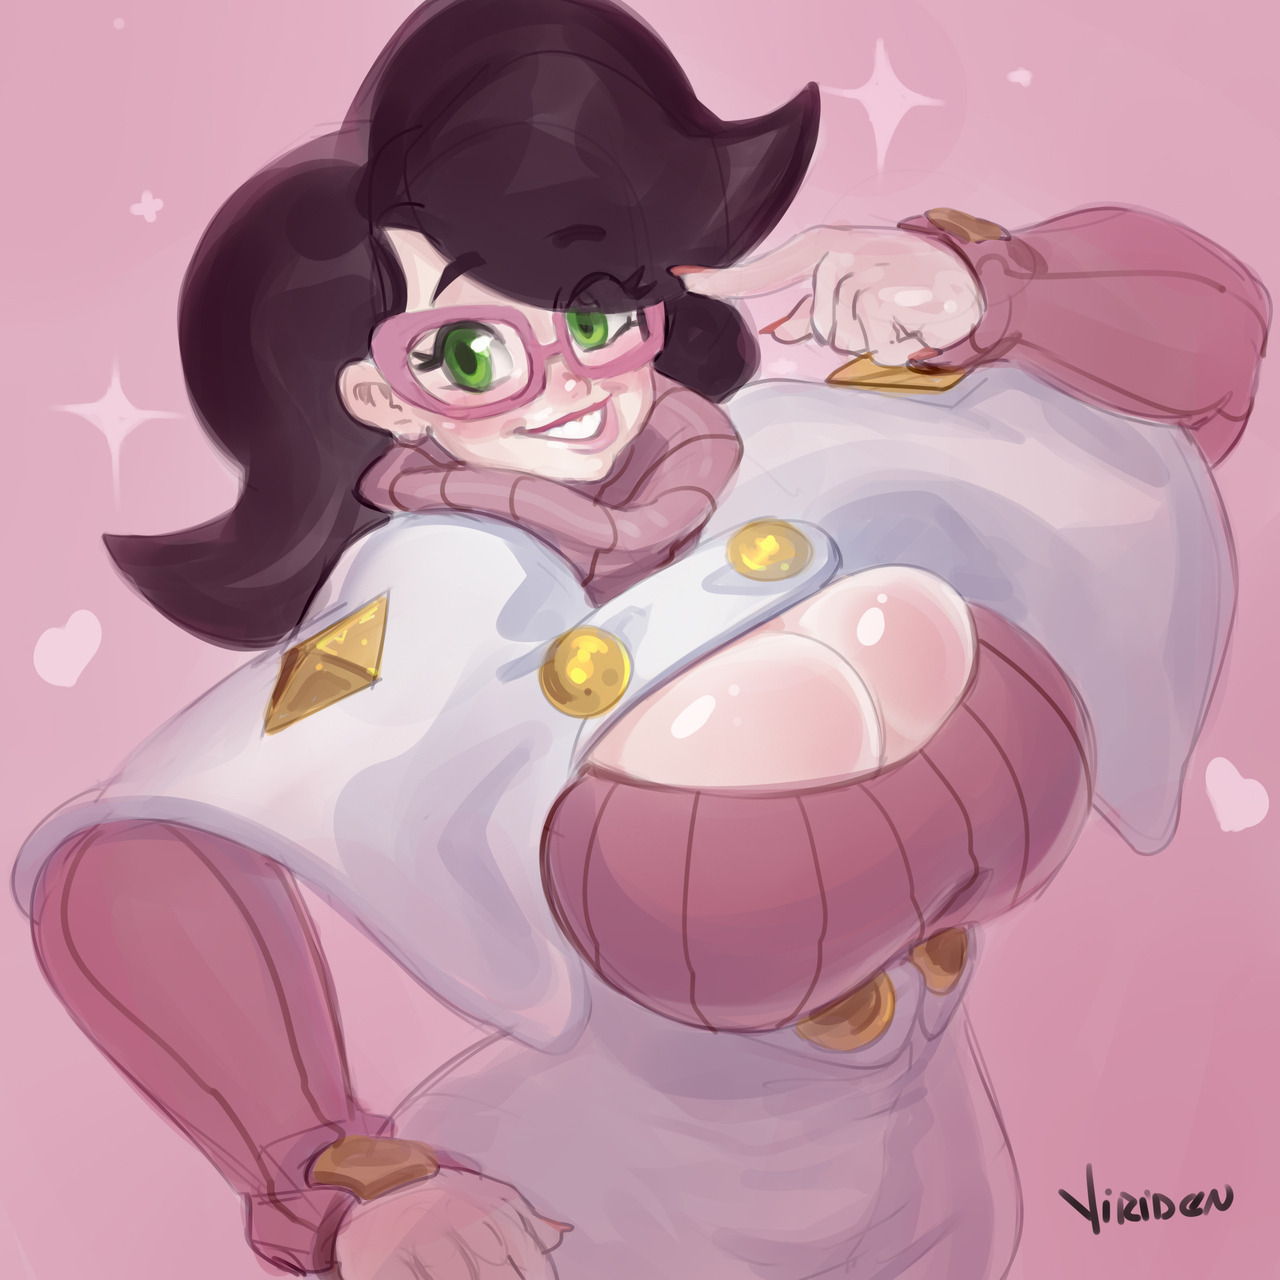 viriden:Commission of Wicke for BlastermathCommissions open :D  Quick paintings